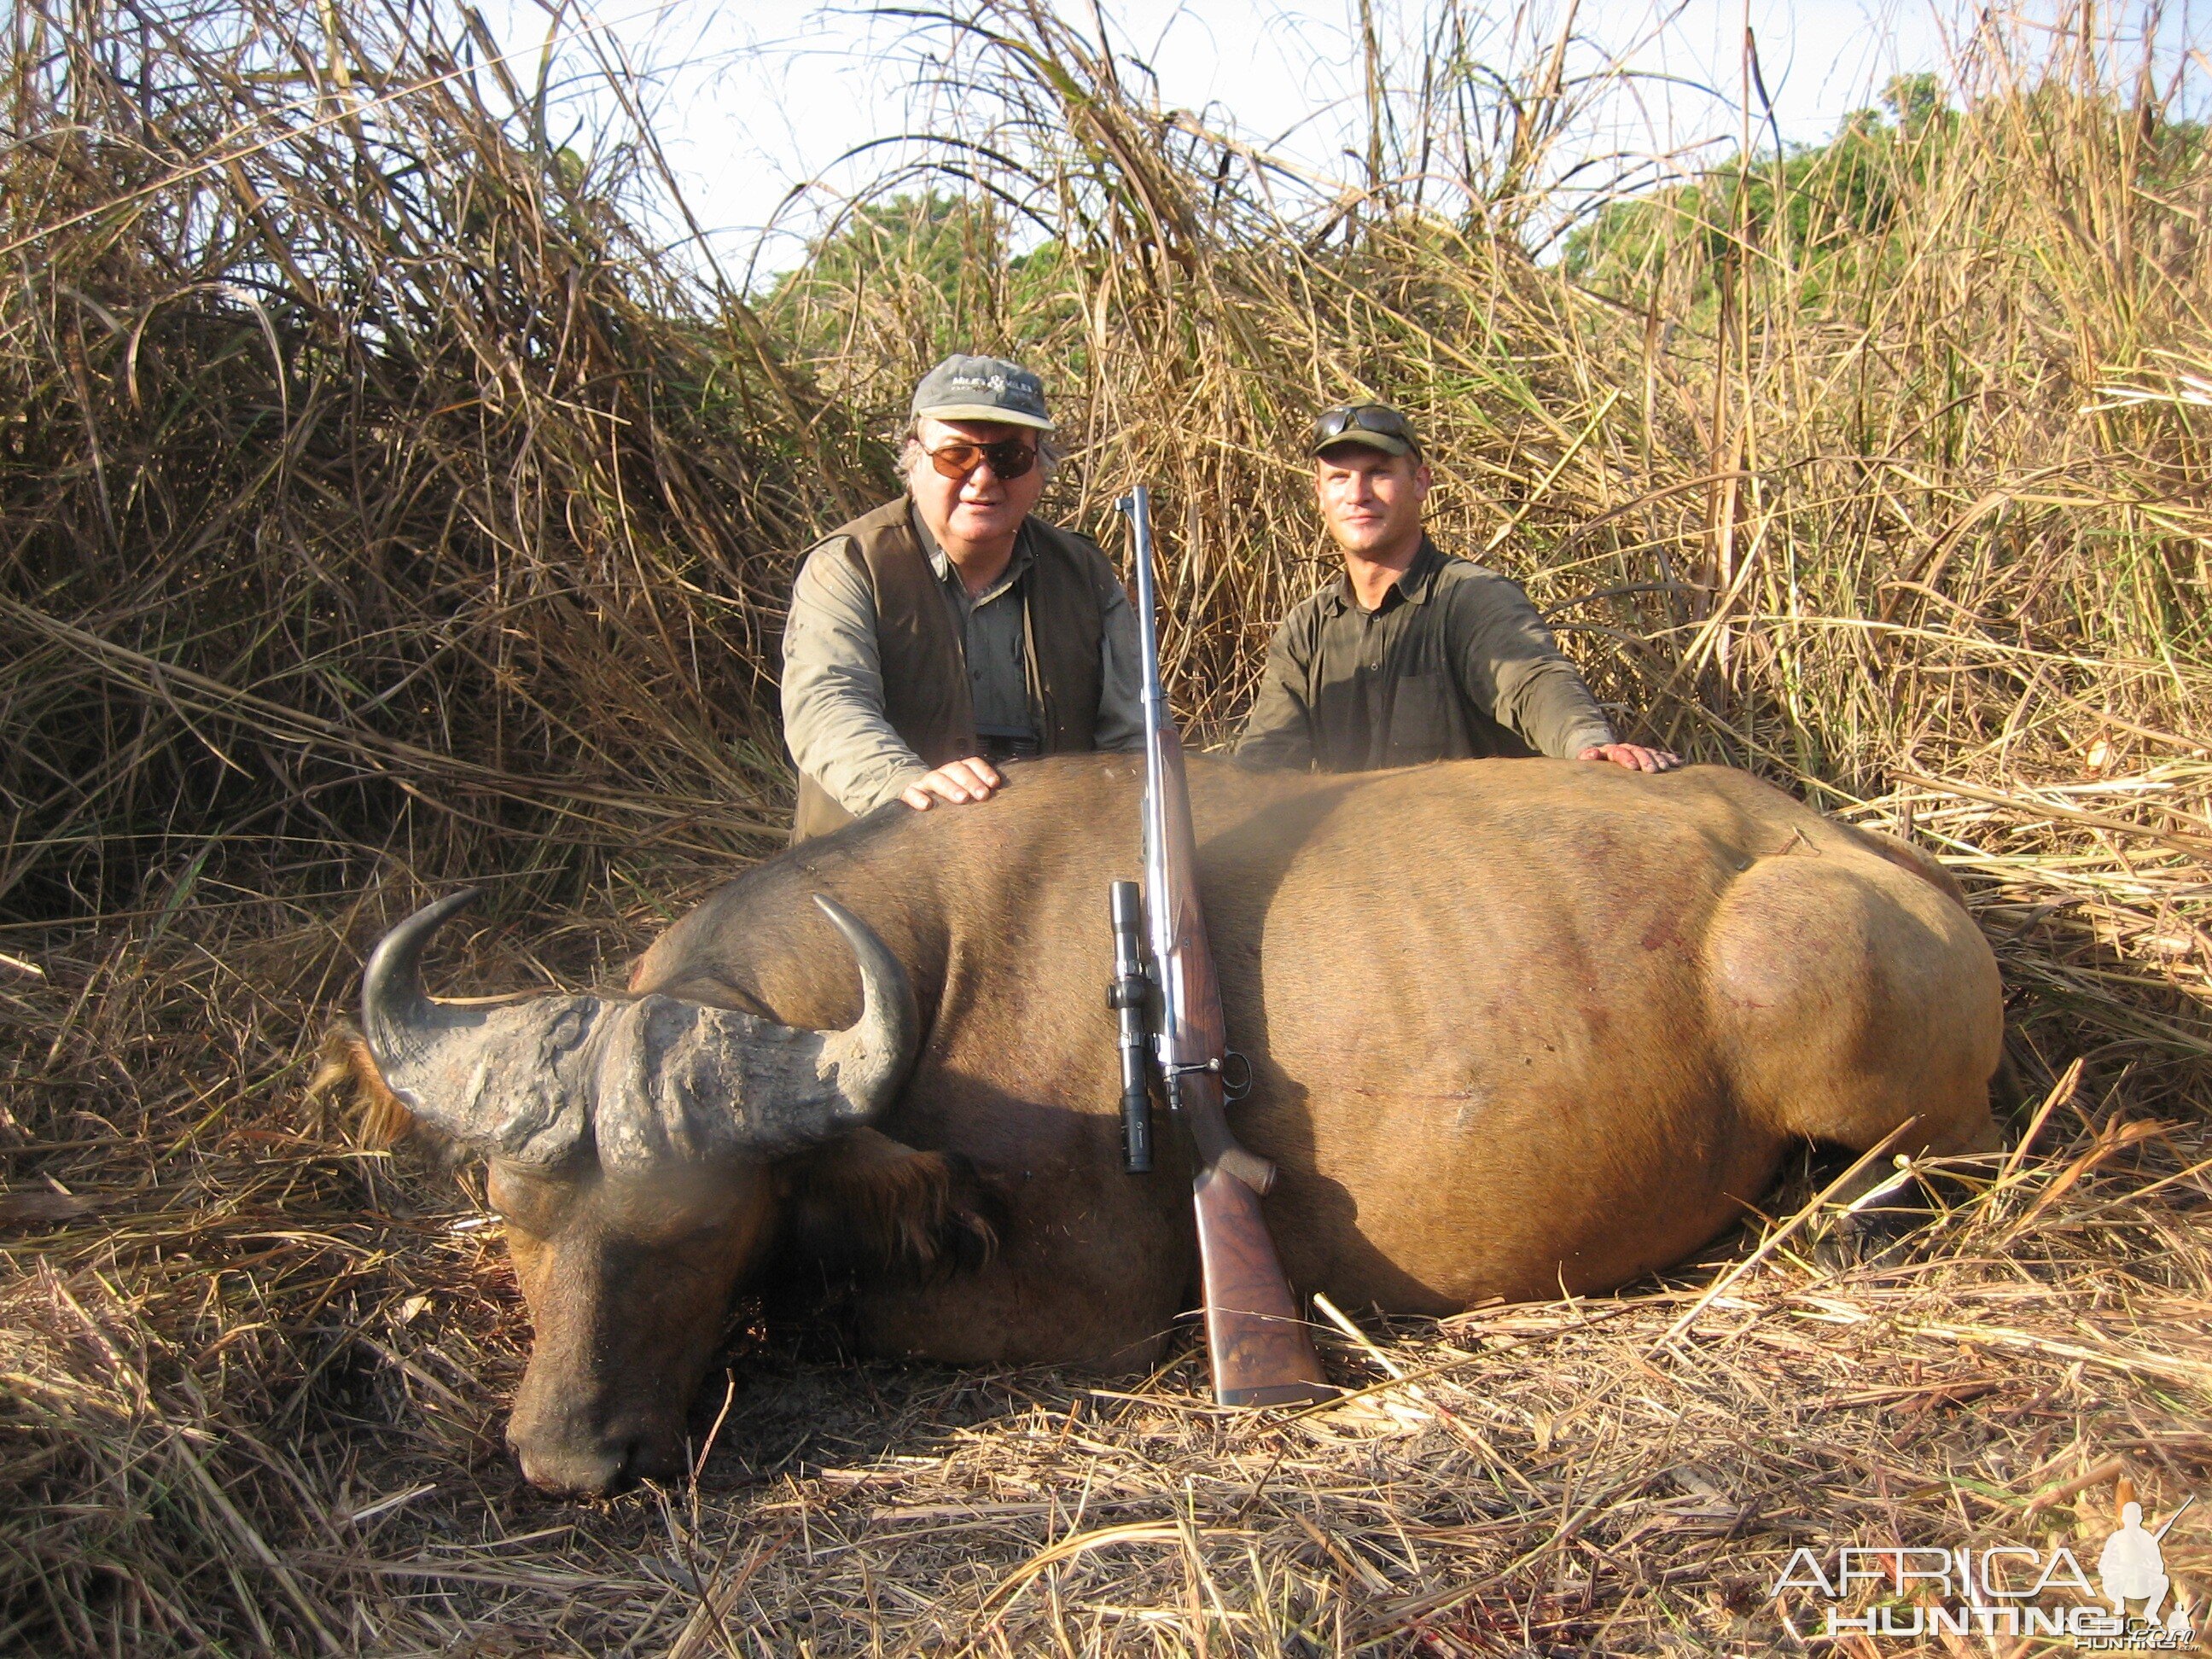 Buffalo hunted in Central African Republic with CAWA